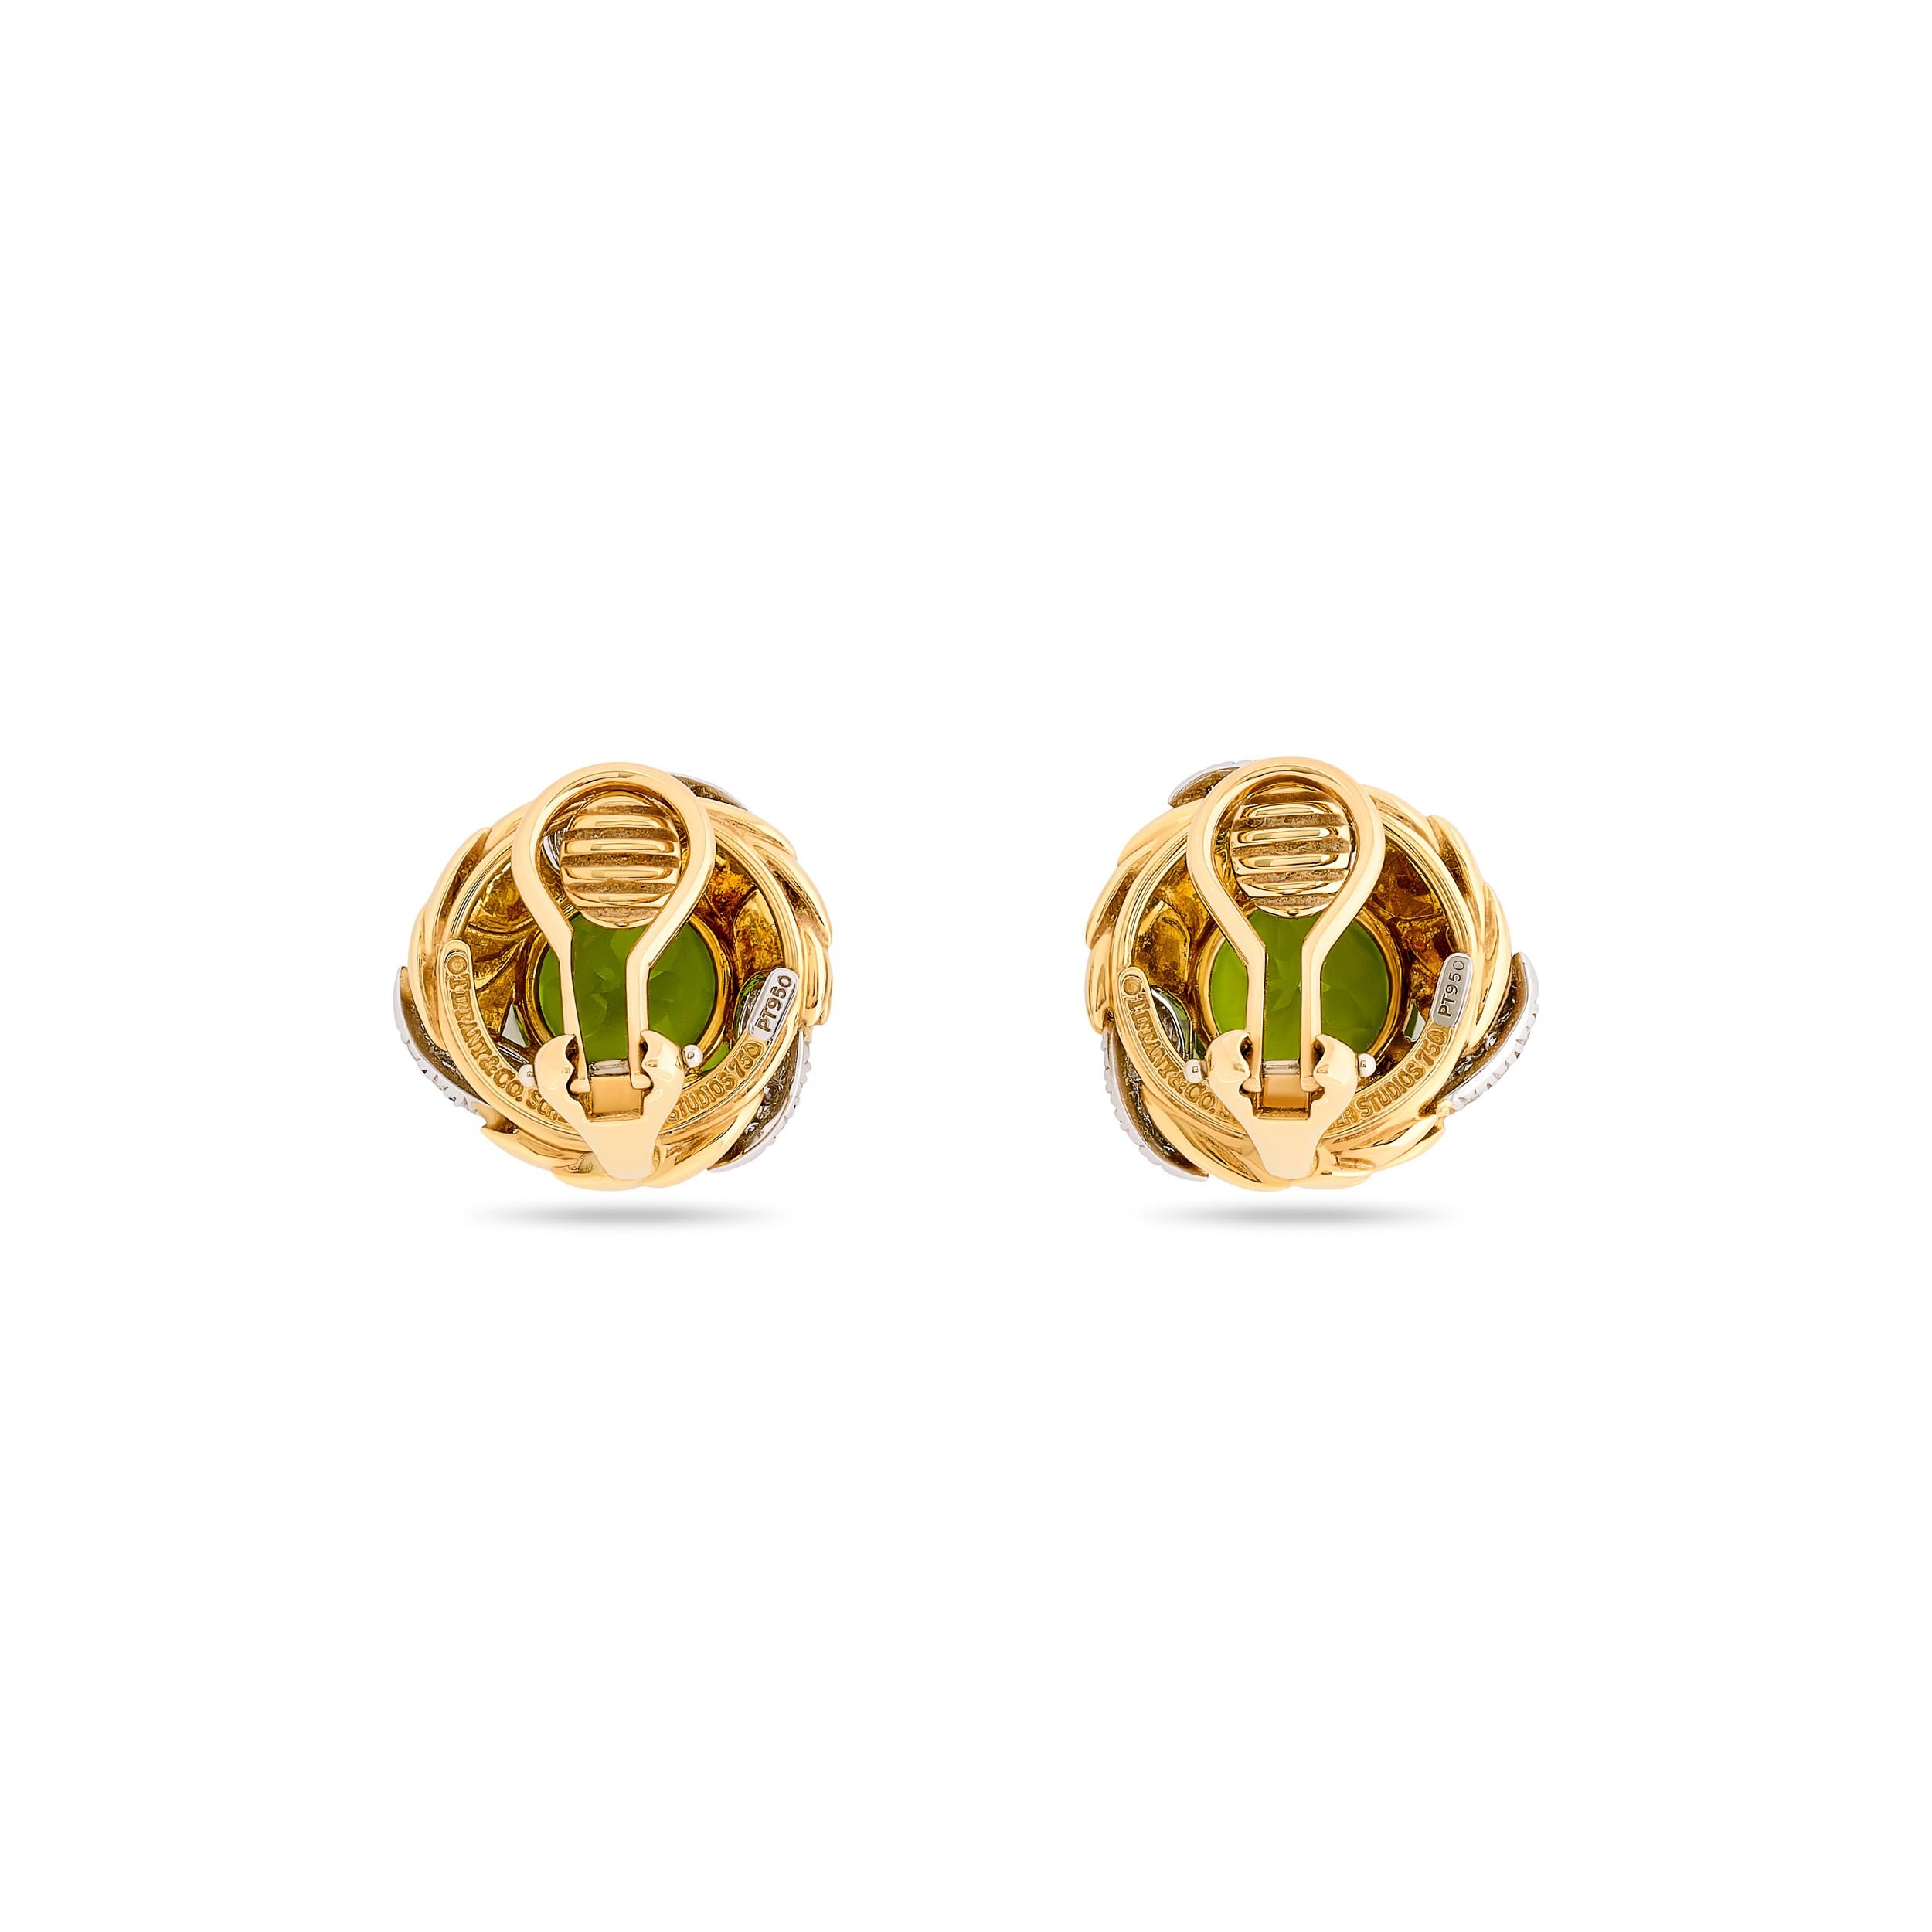 Round Cut Tiffany & Co. Schlumberger 18K Yellow Gold and Platinum Peridot Diamond Earrings For Sale